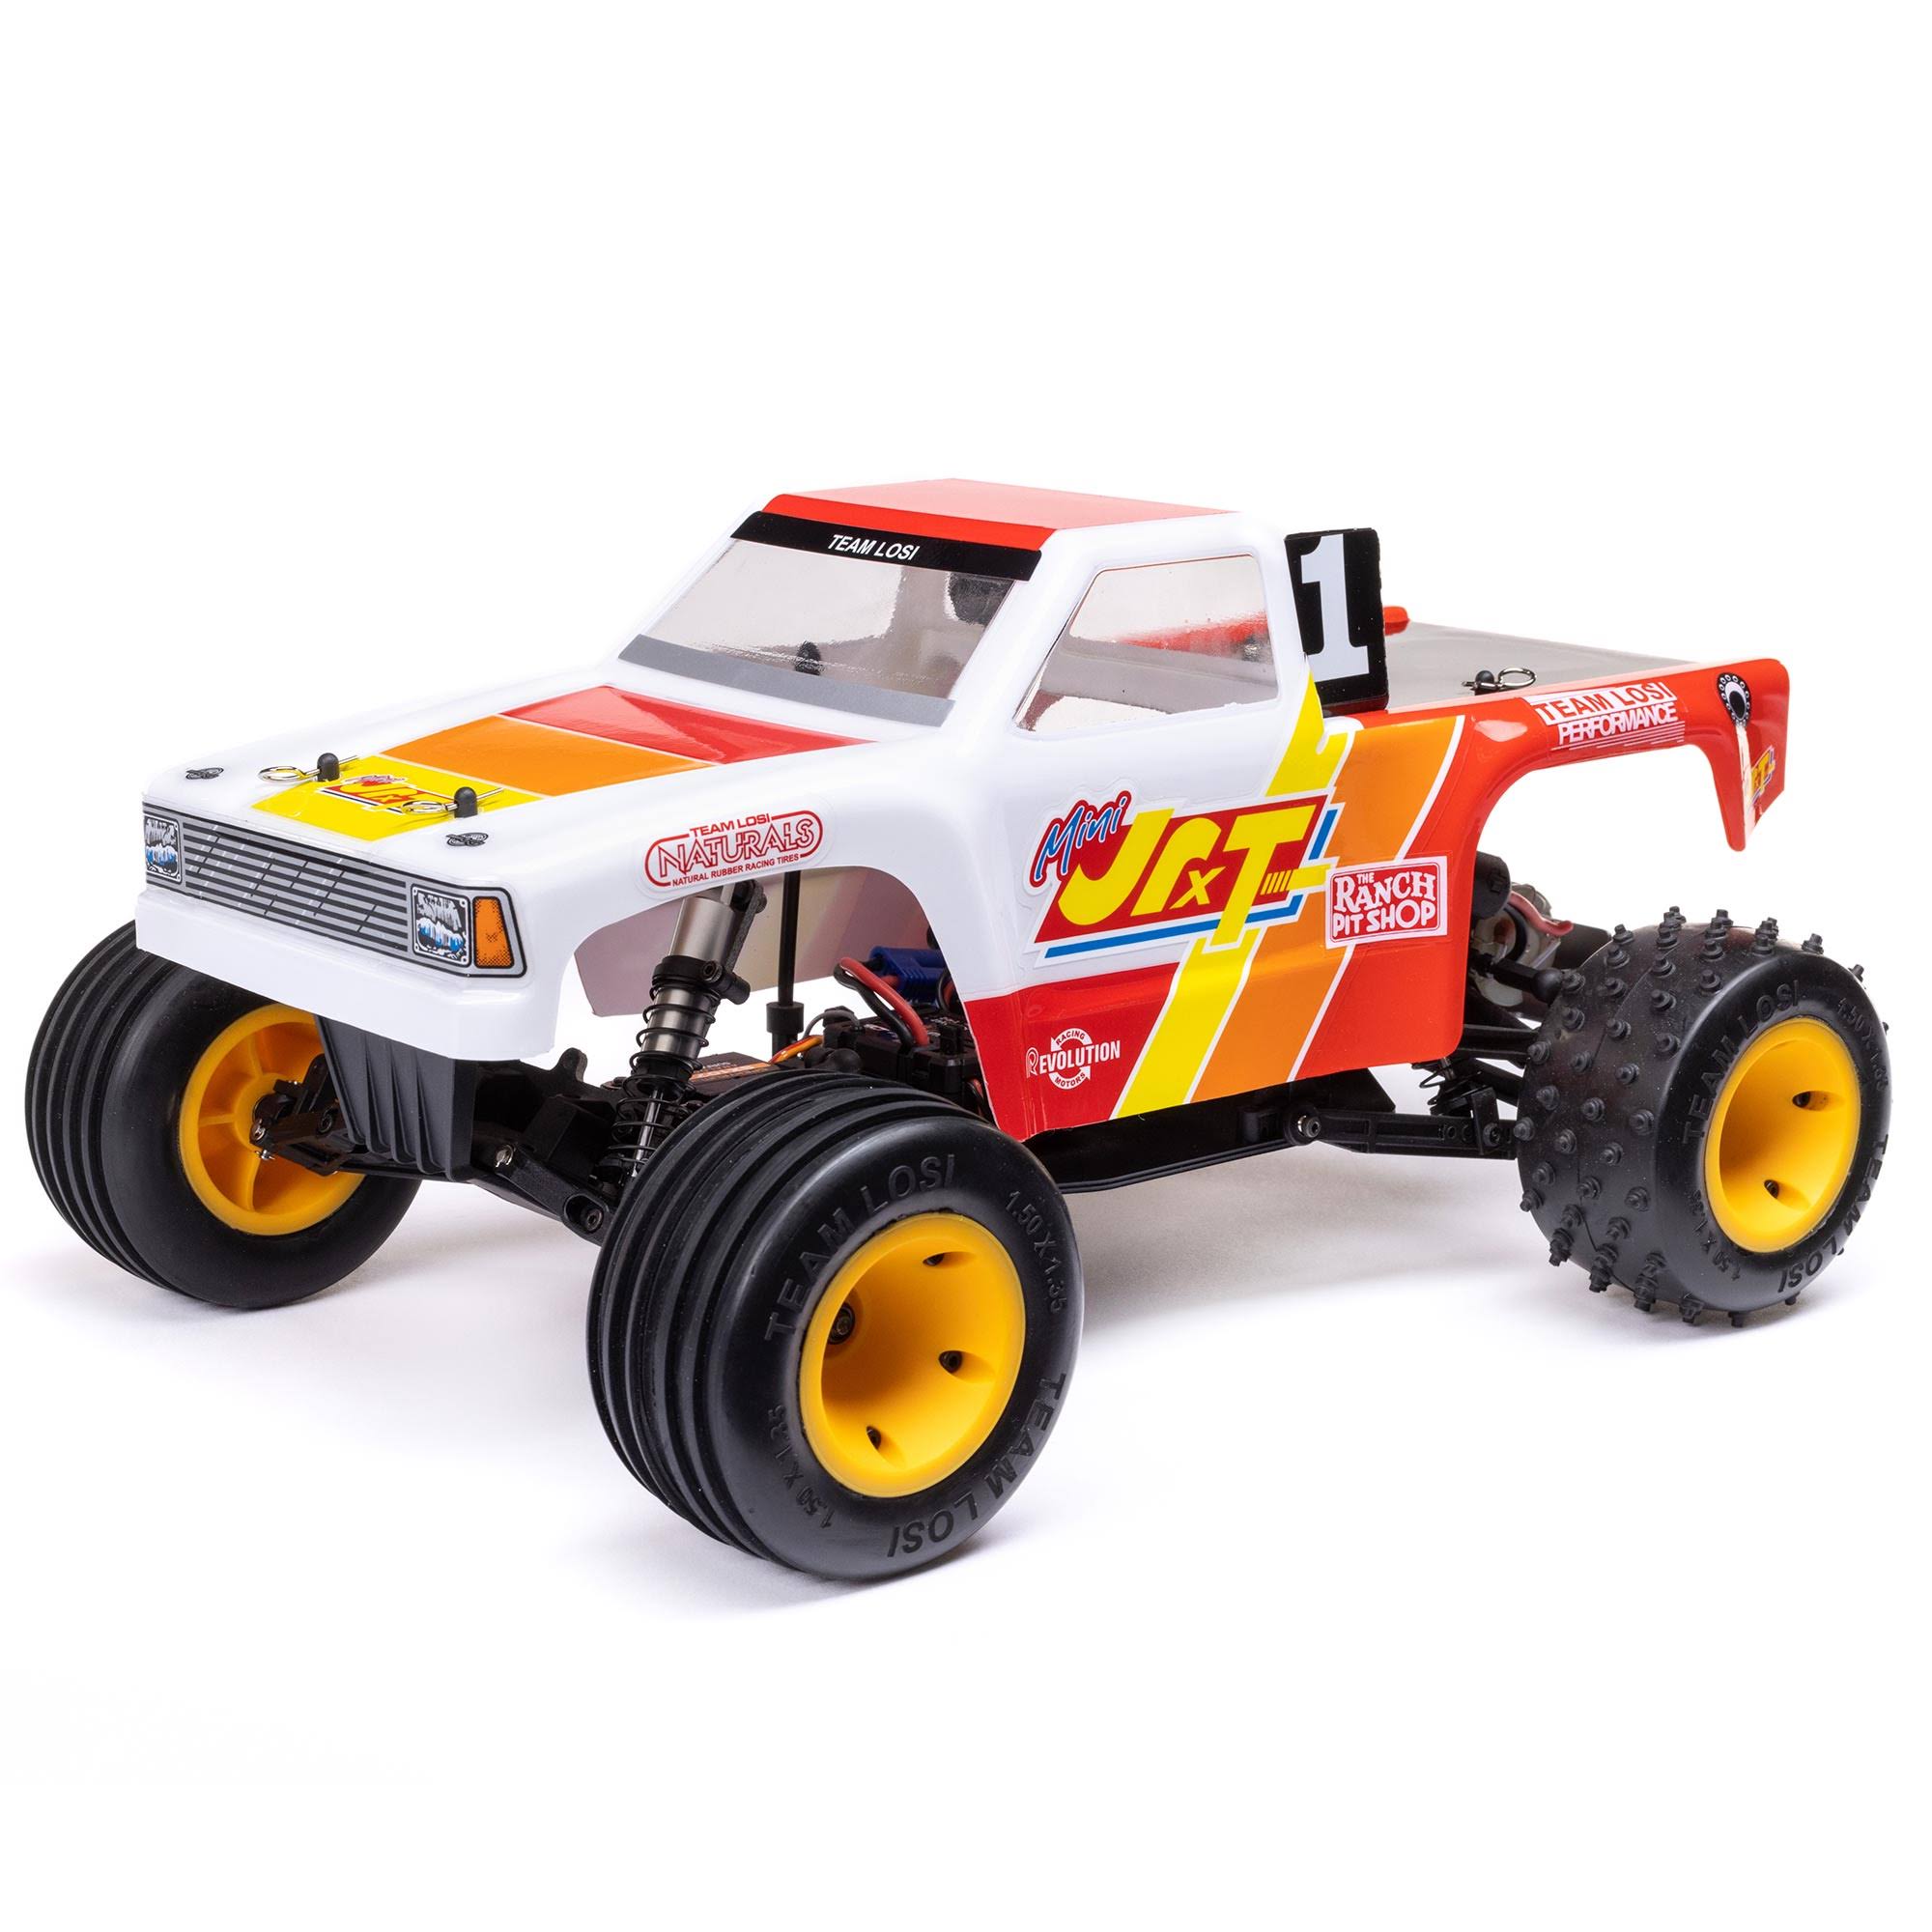 Losi 1/16 Mini JRXT Brushed 2WD Limited Edition Racing Monster Truck RTR LOS01021